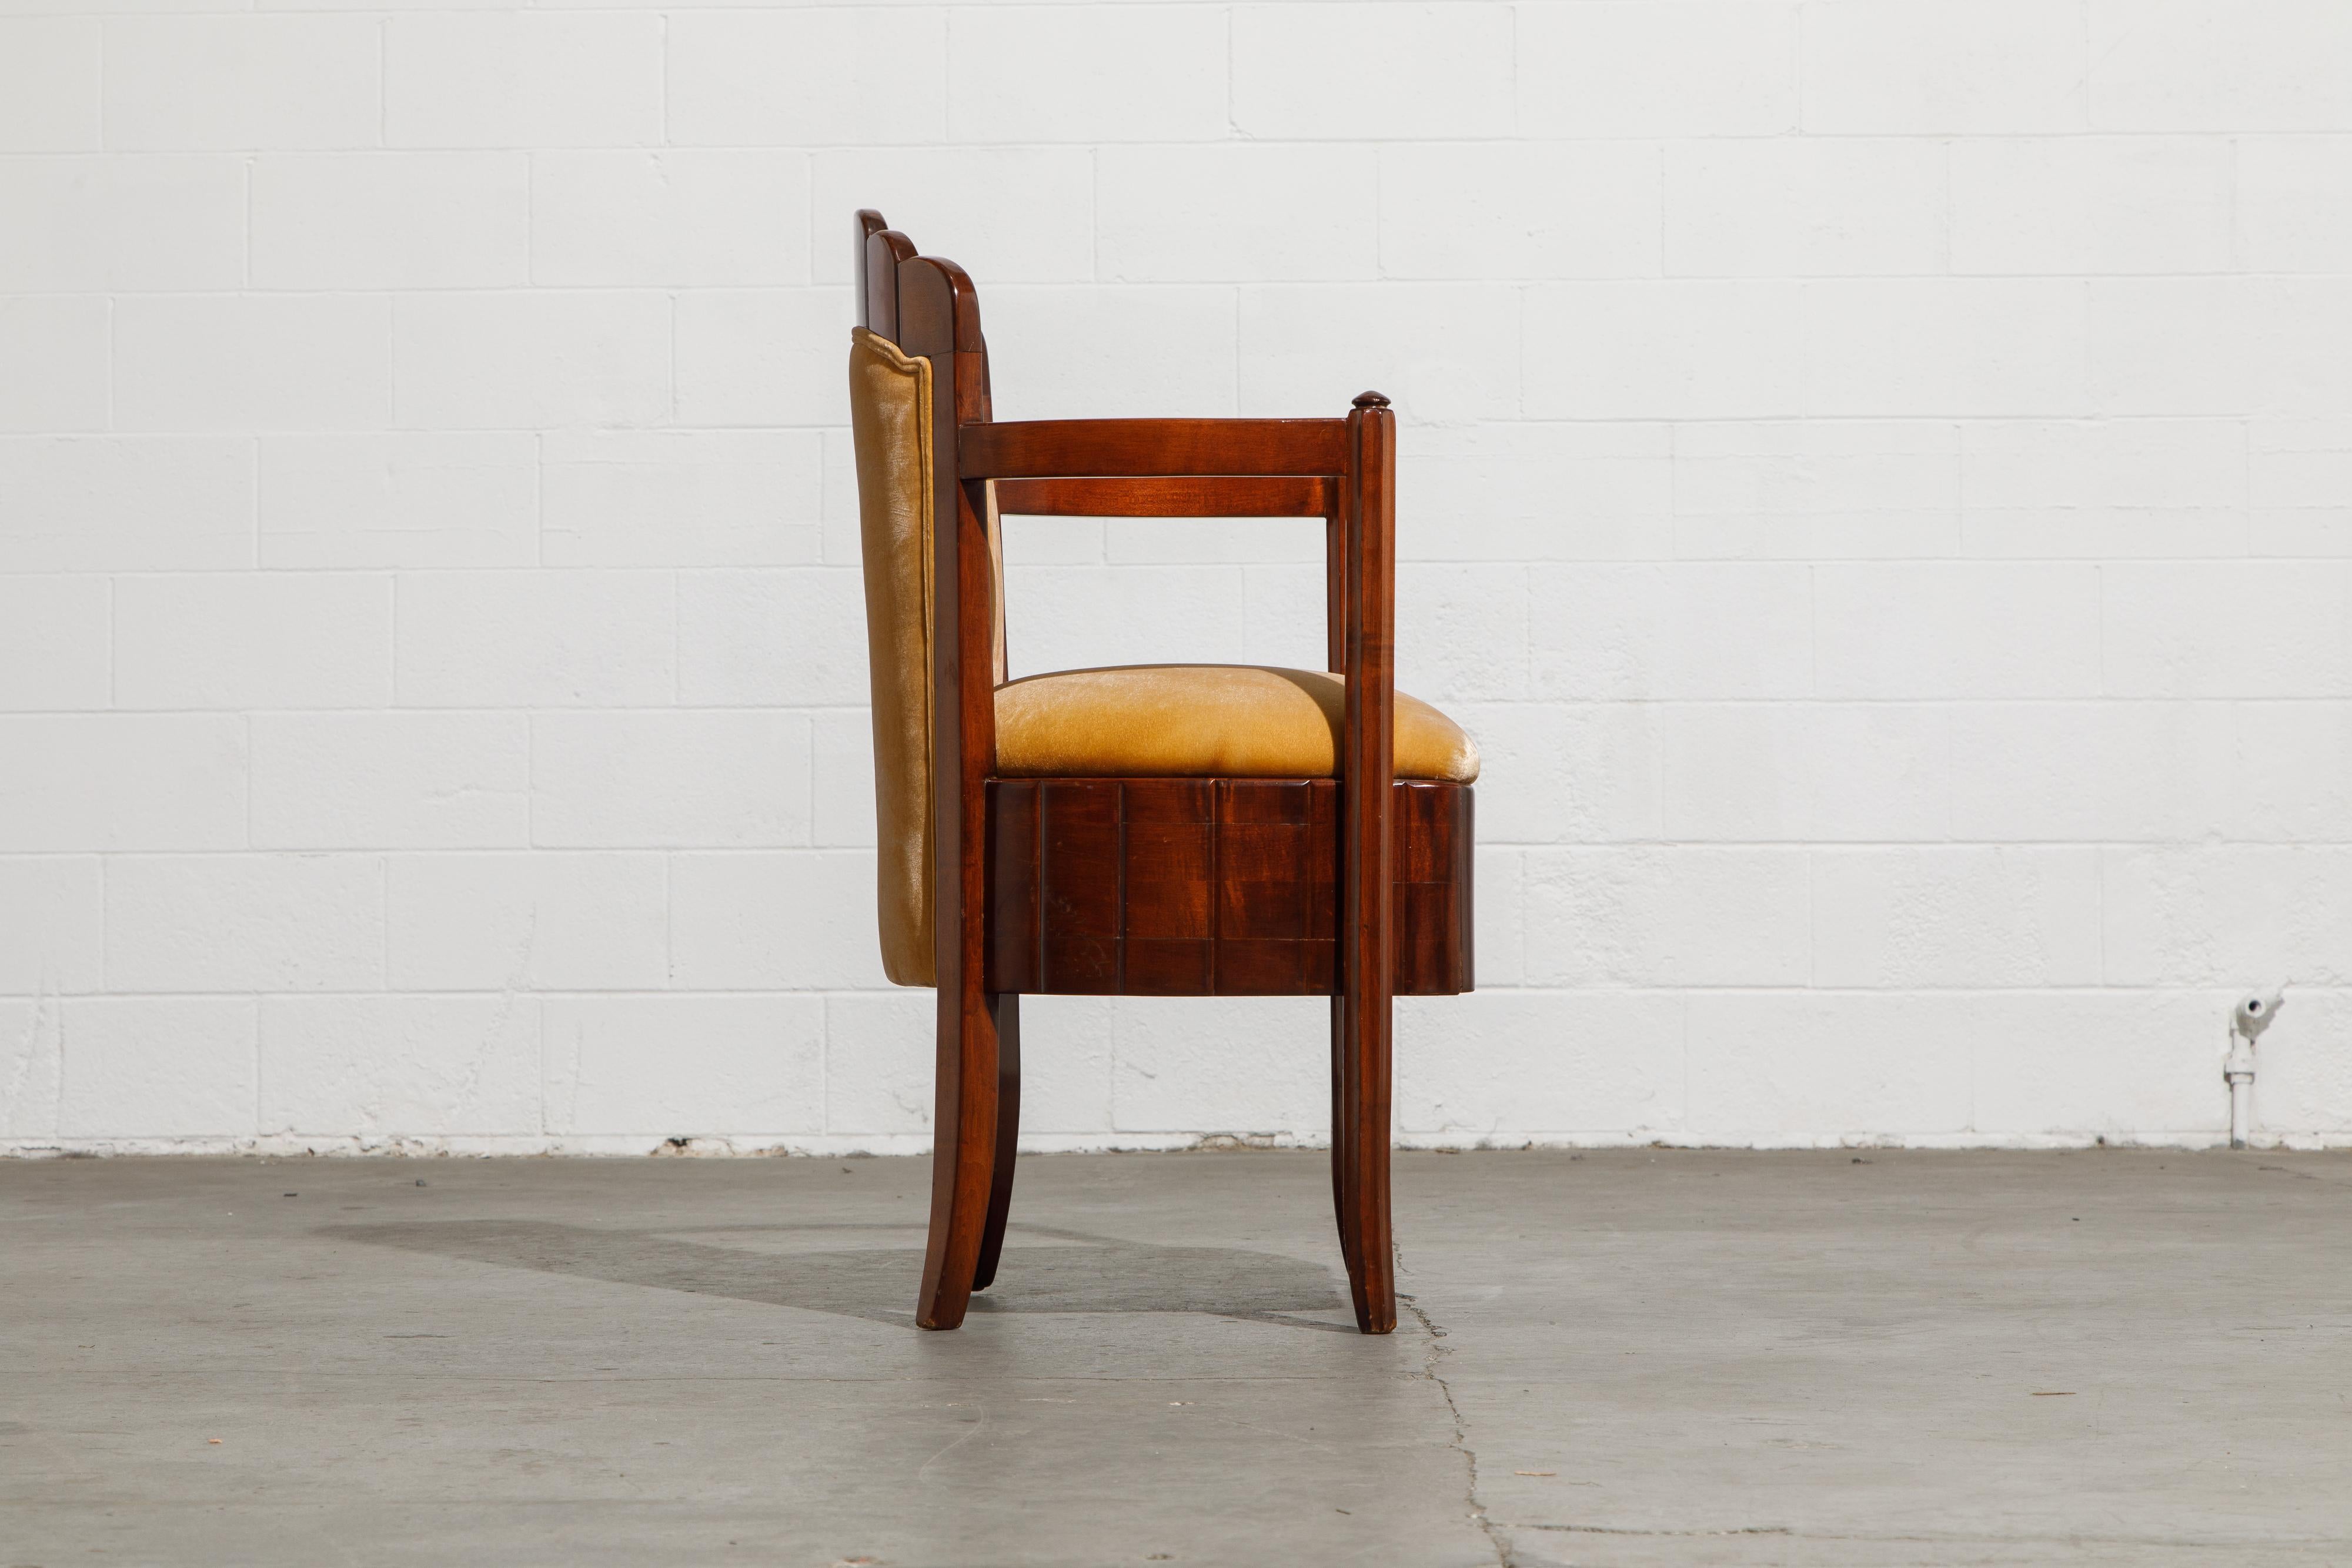 Important Pierre Patout Mahogany Dining Chairs from S.S. Île de France, c. 1927 For Sale 6